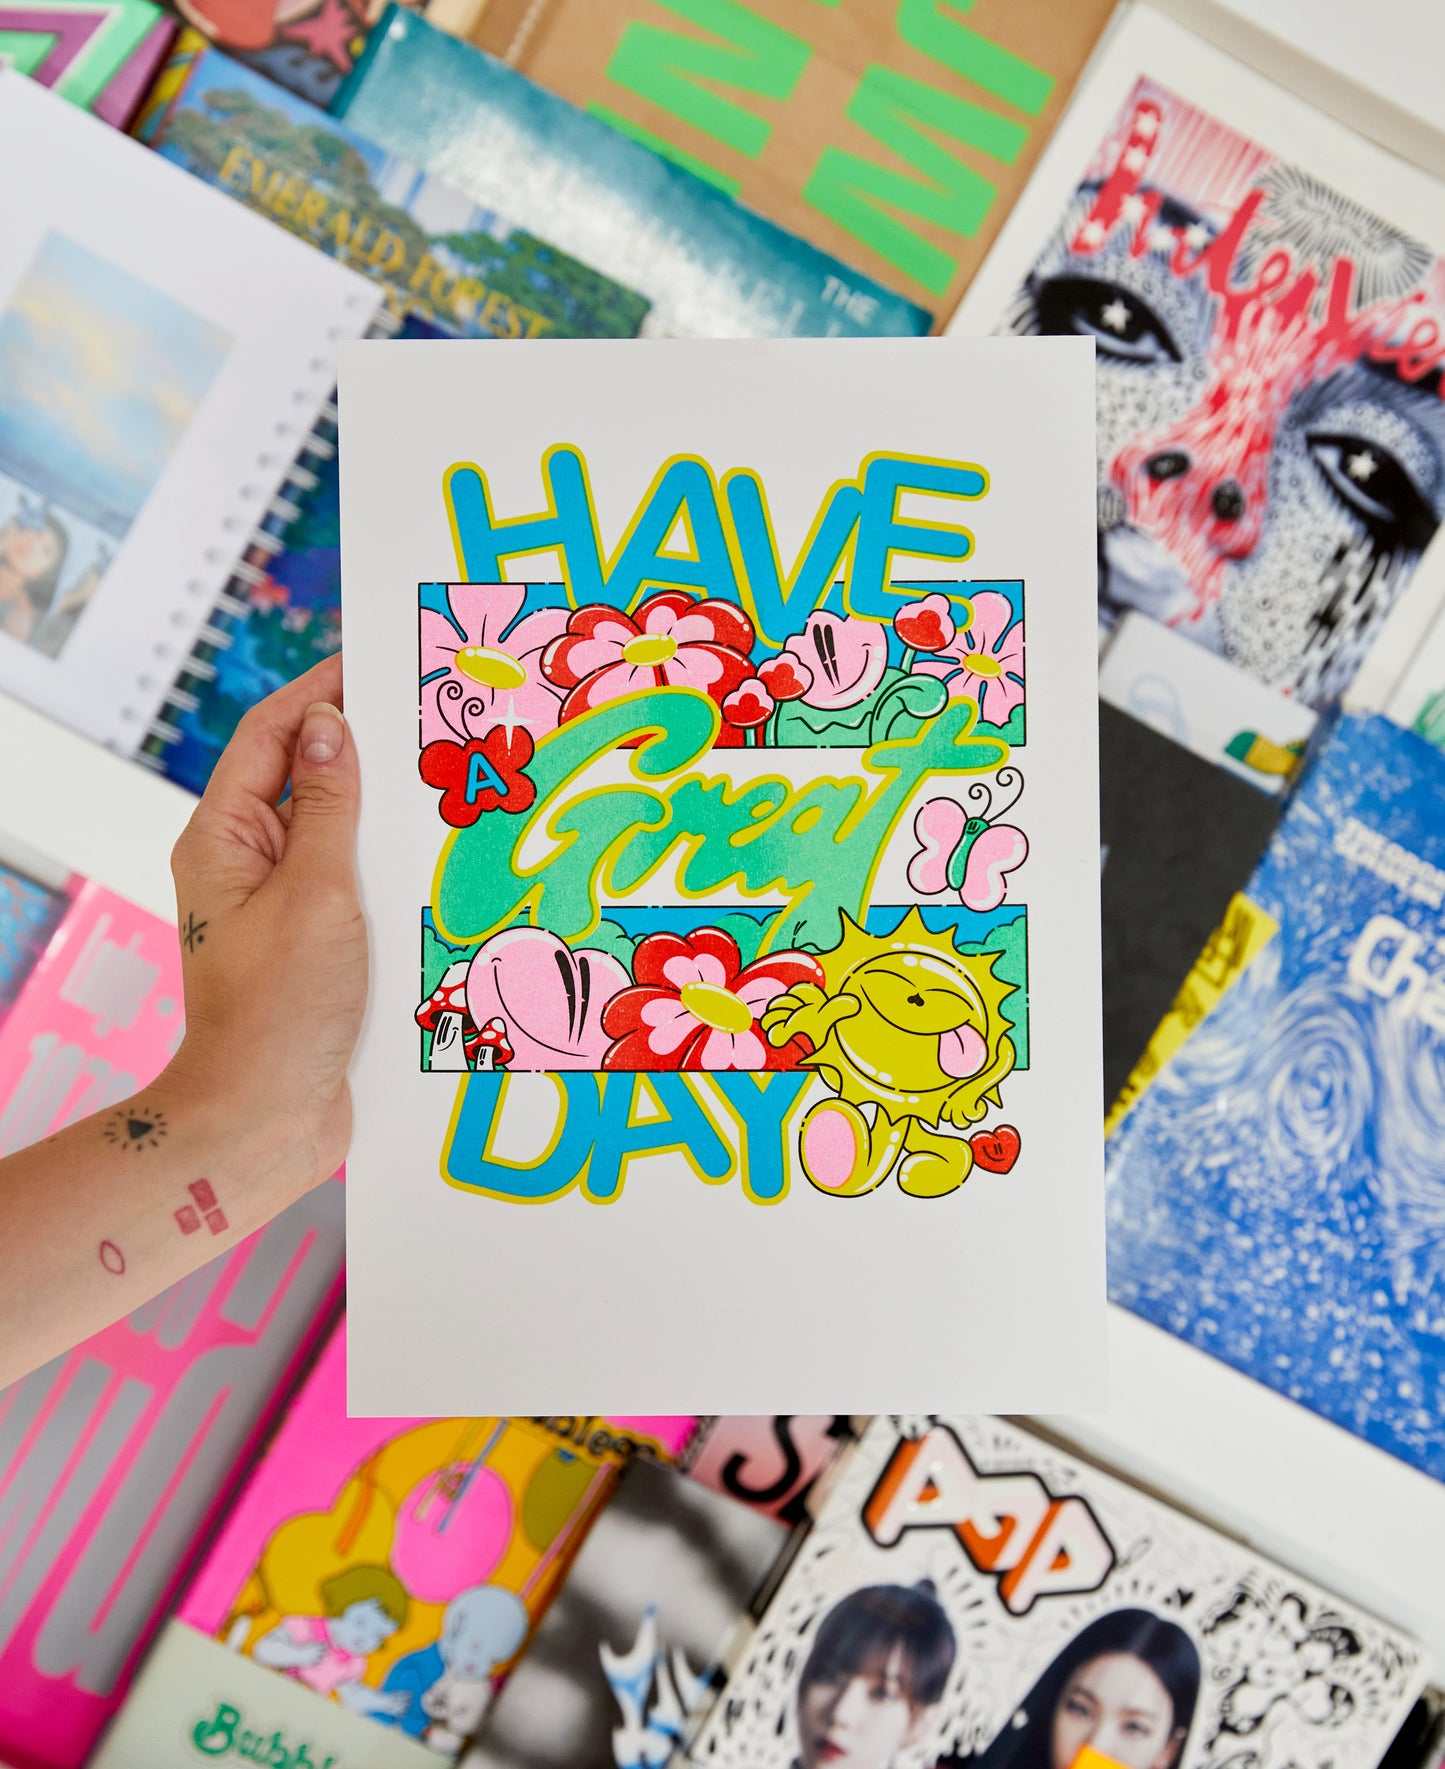 HAVE A GREAT DAY! risograph print